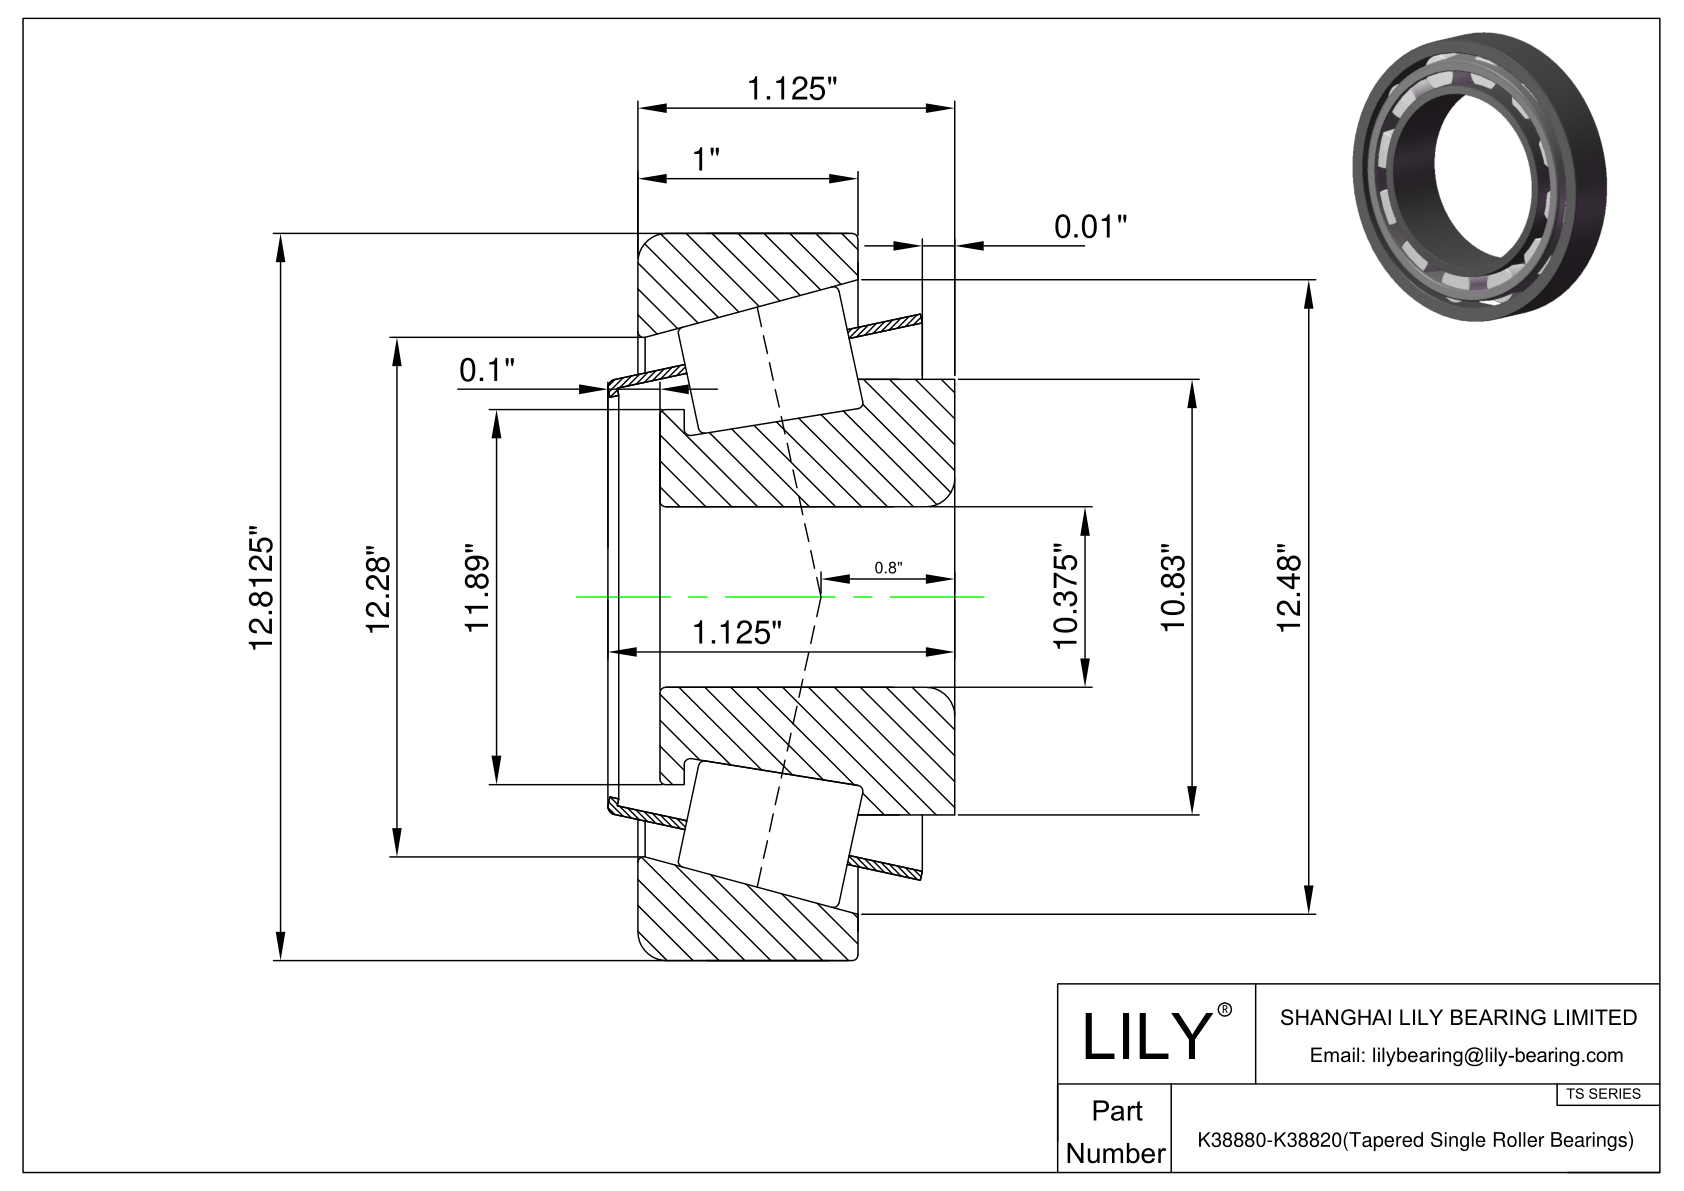 K38880-K38820 TS (Tapered Single Roller Bearings) (Imperial) cad drawing